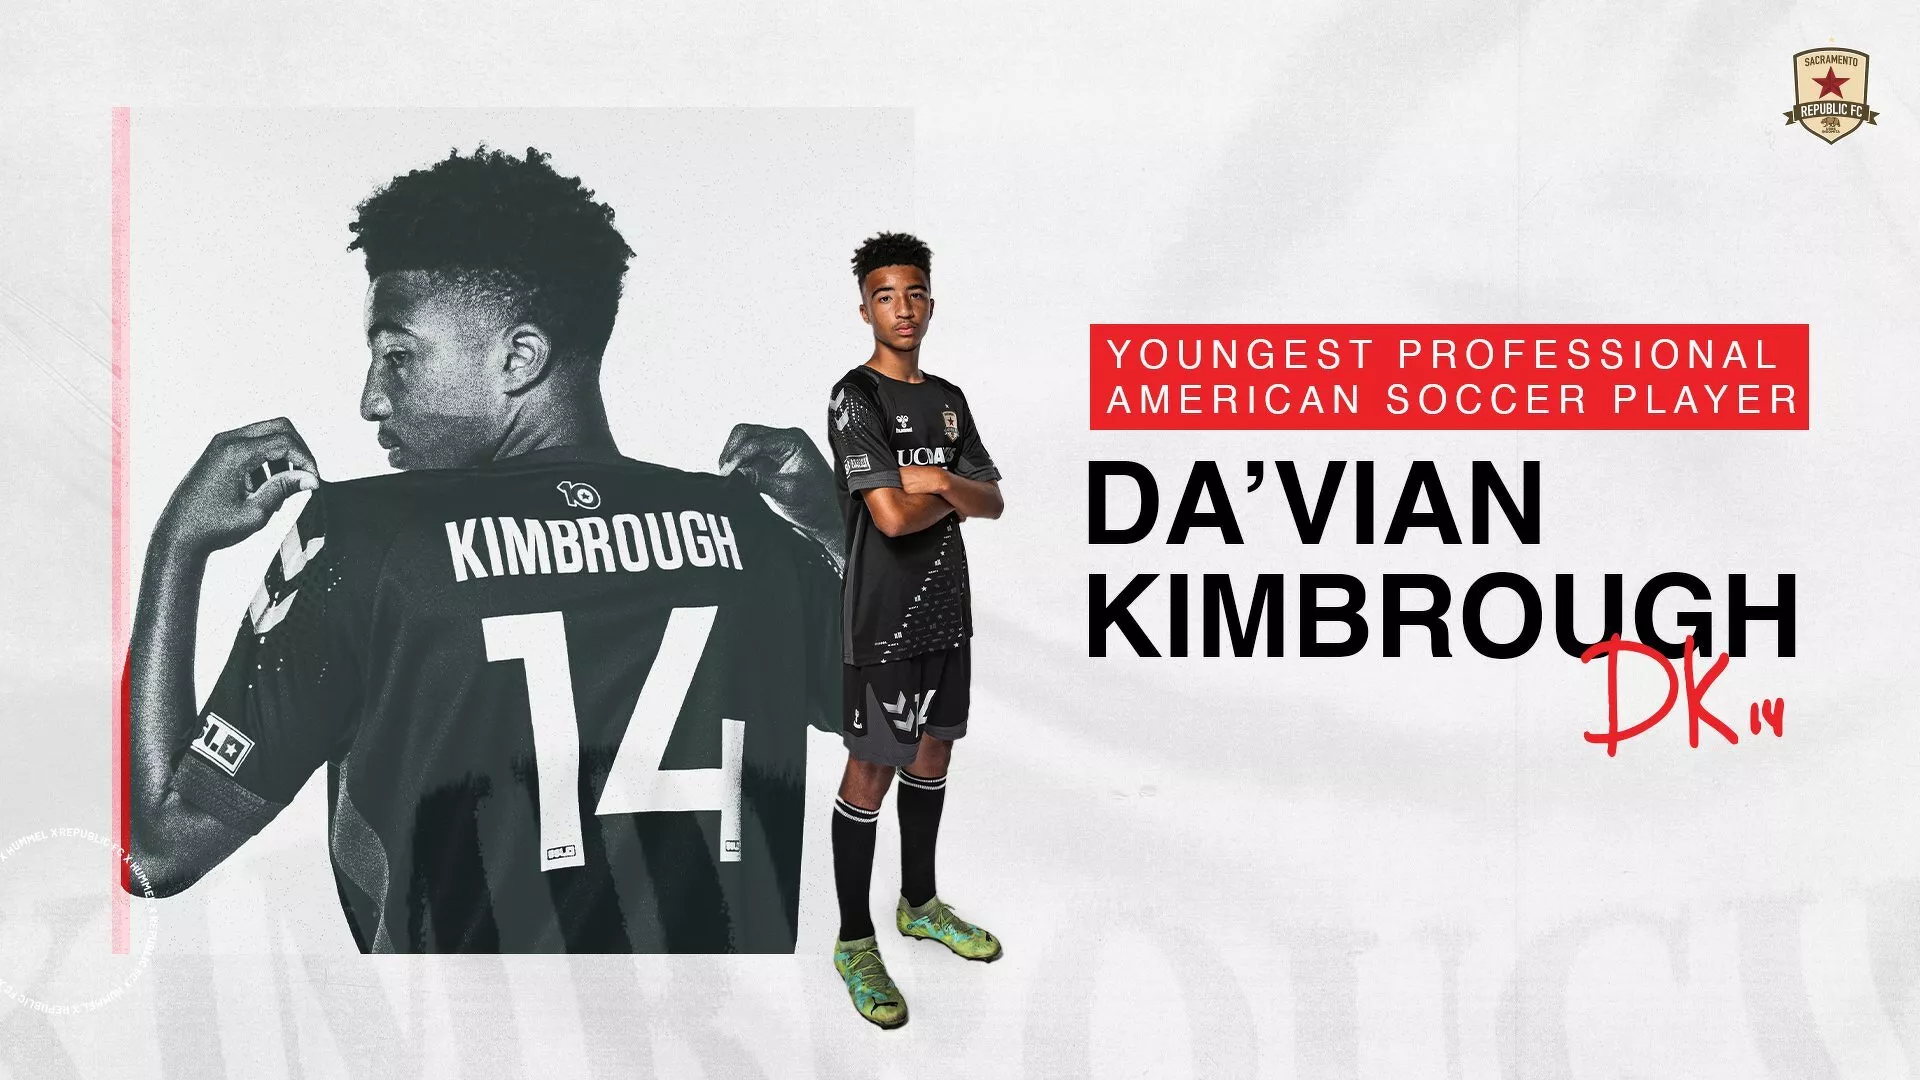 Da'vian Kimbrough,13, becomes youngest player to make professional debut in US Soccer history